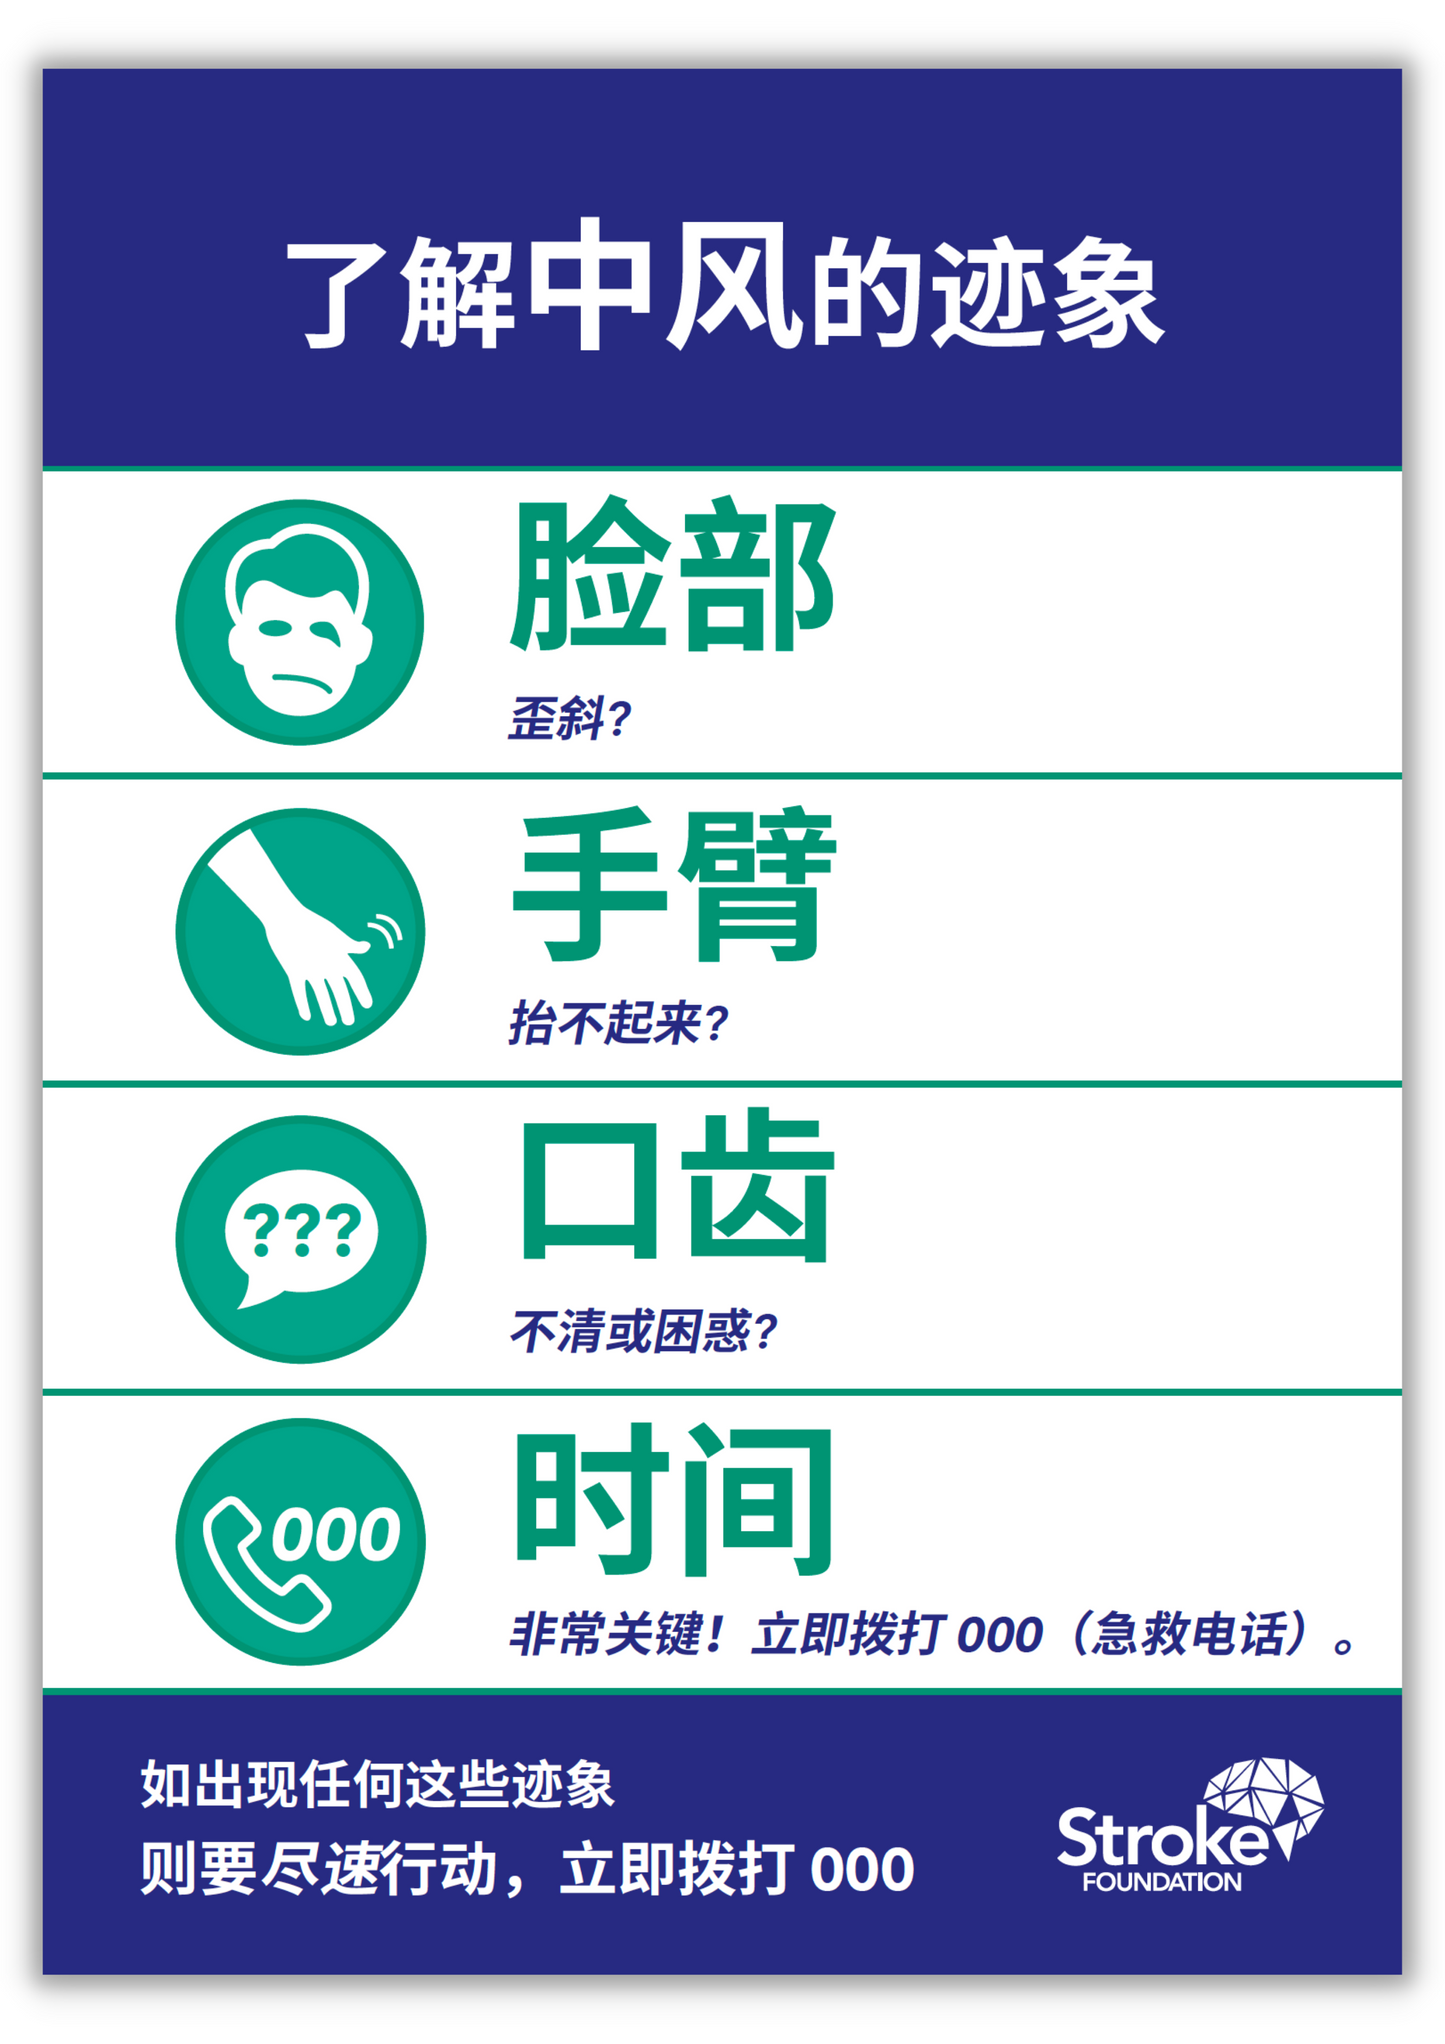 **NEW** F.A.S.T. poster (A4 size) - 简体中文 (Chinese Simplified)